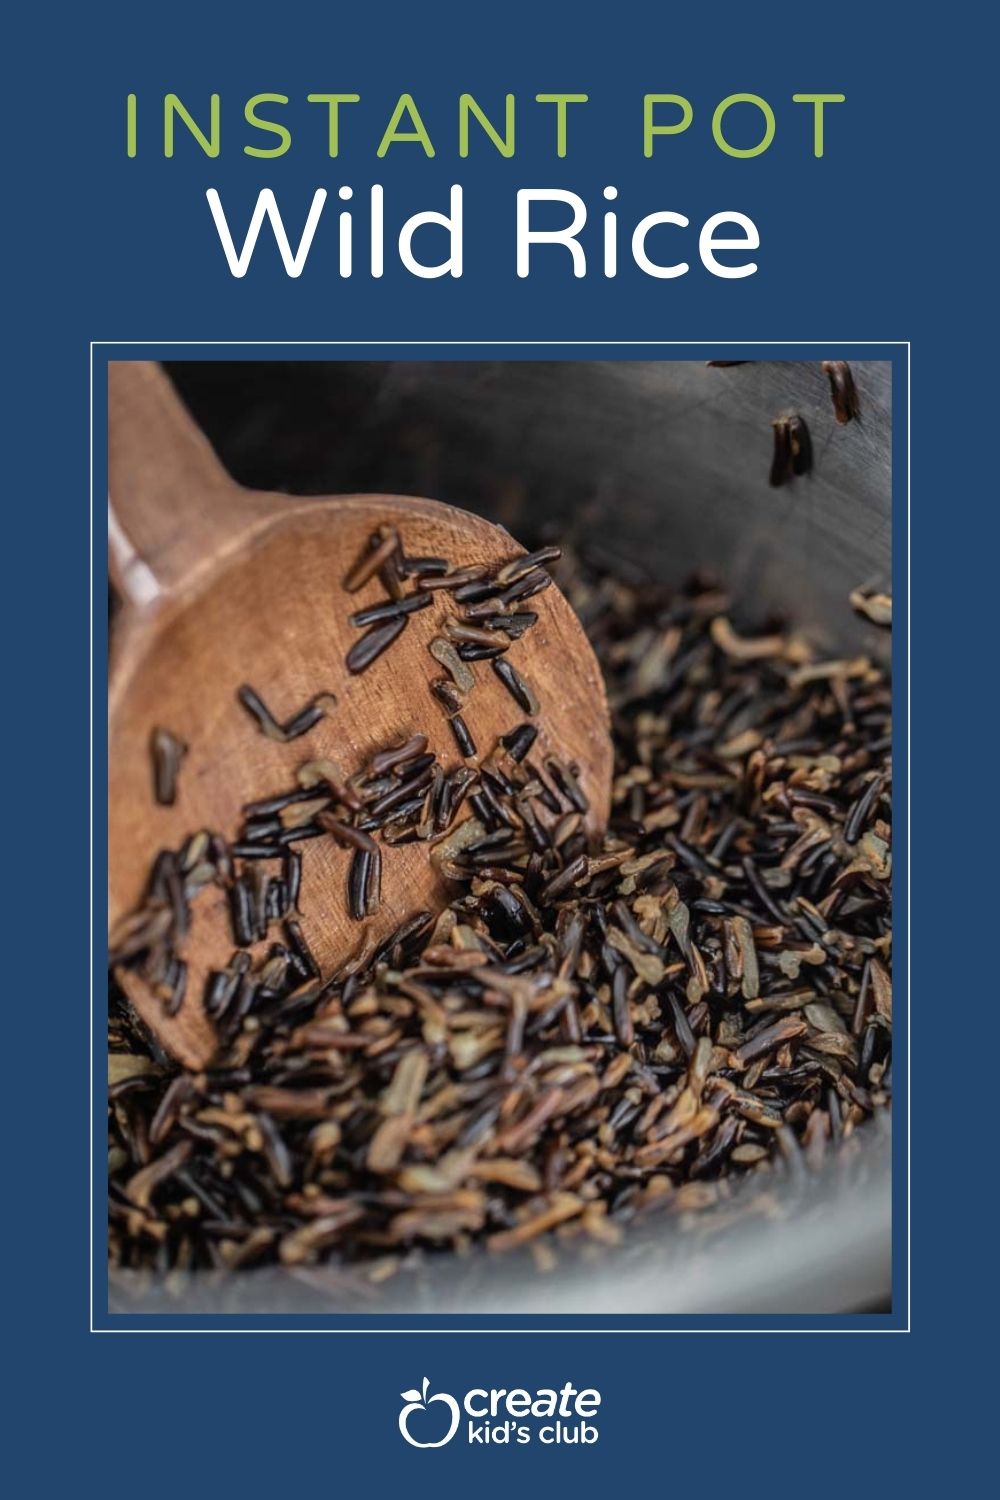 Instant pot of wooden spoon stirring wild rice